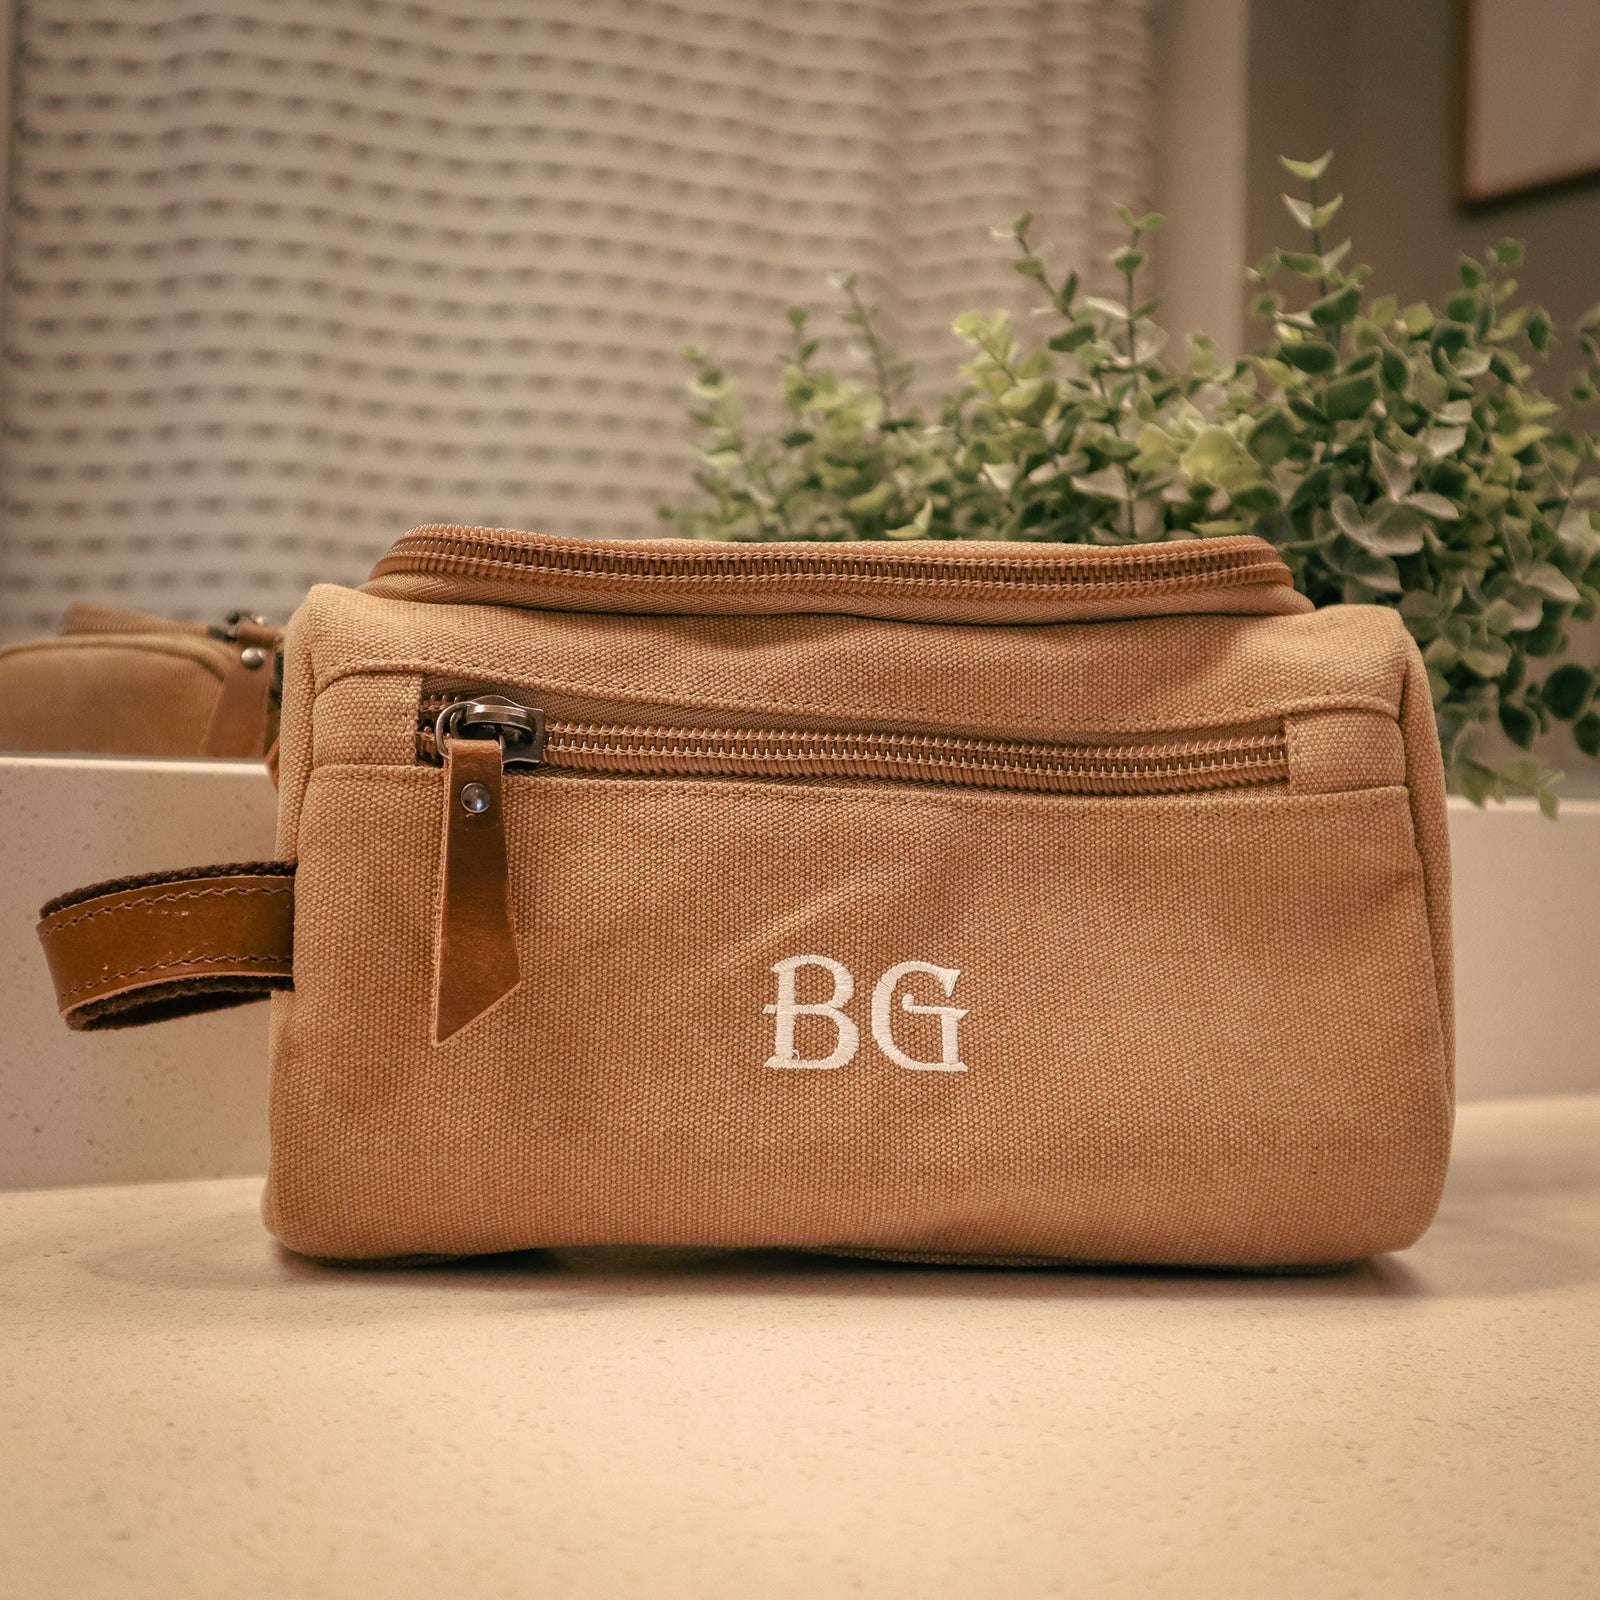  Personalized Leather Toiletry Bag For Men with Hook, Groomsmen  Gifts Travel Bag Laser Engraved Name Monogram Leather Gift Anniversary Gift  For Him Husband Father Leather Dopp Kit with Side Handle 